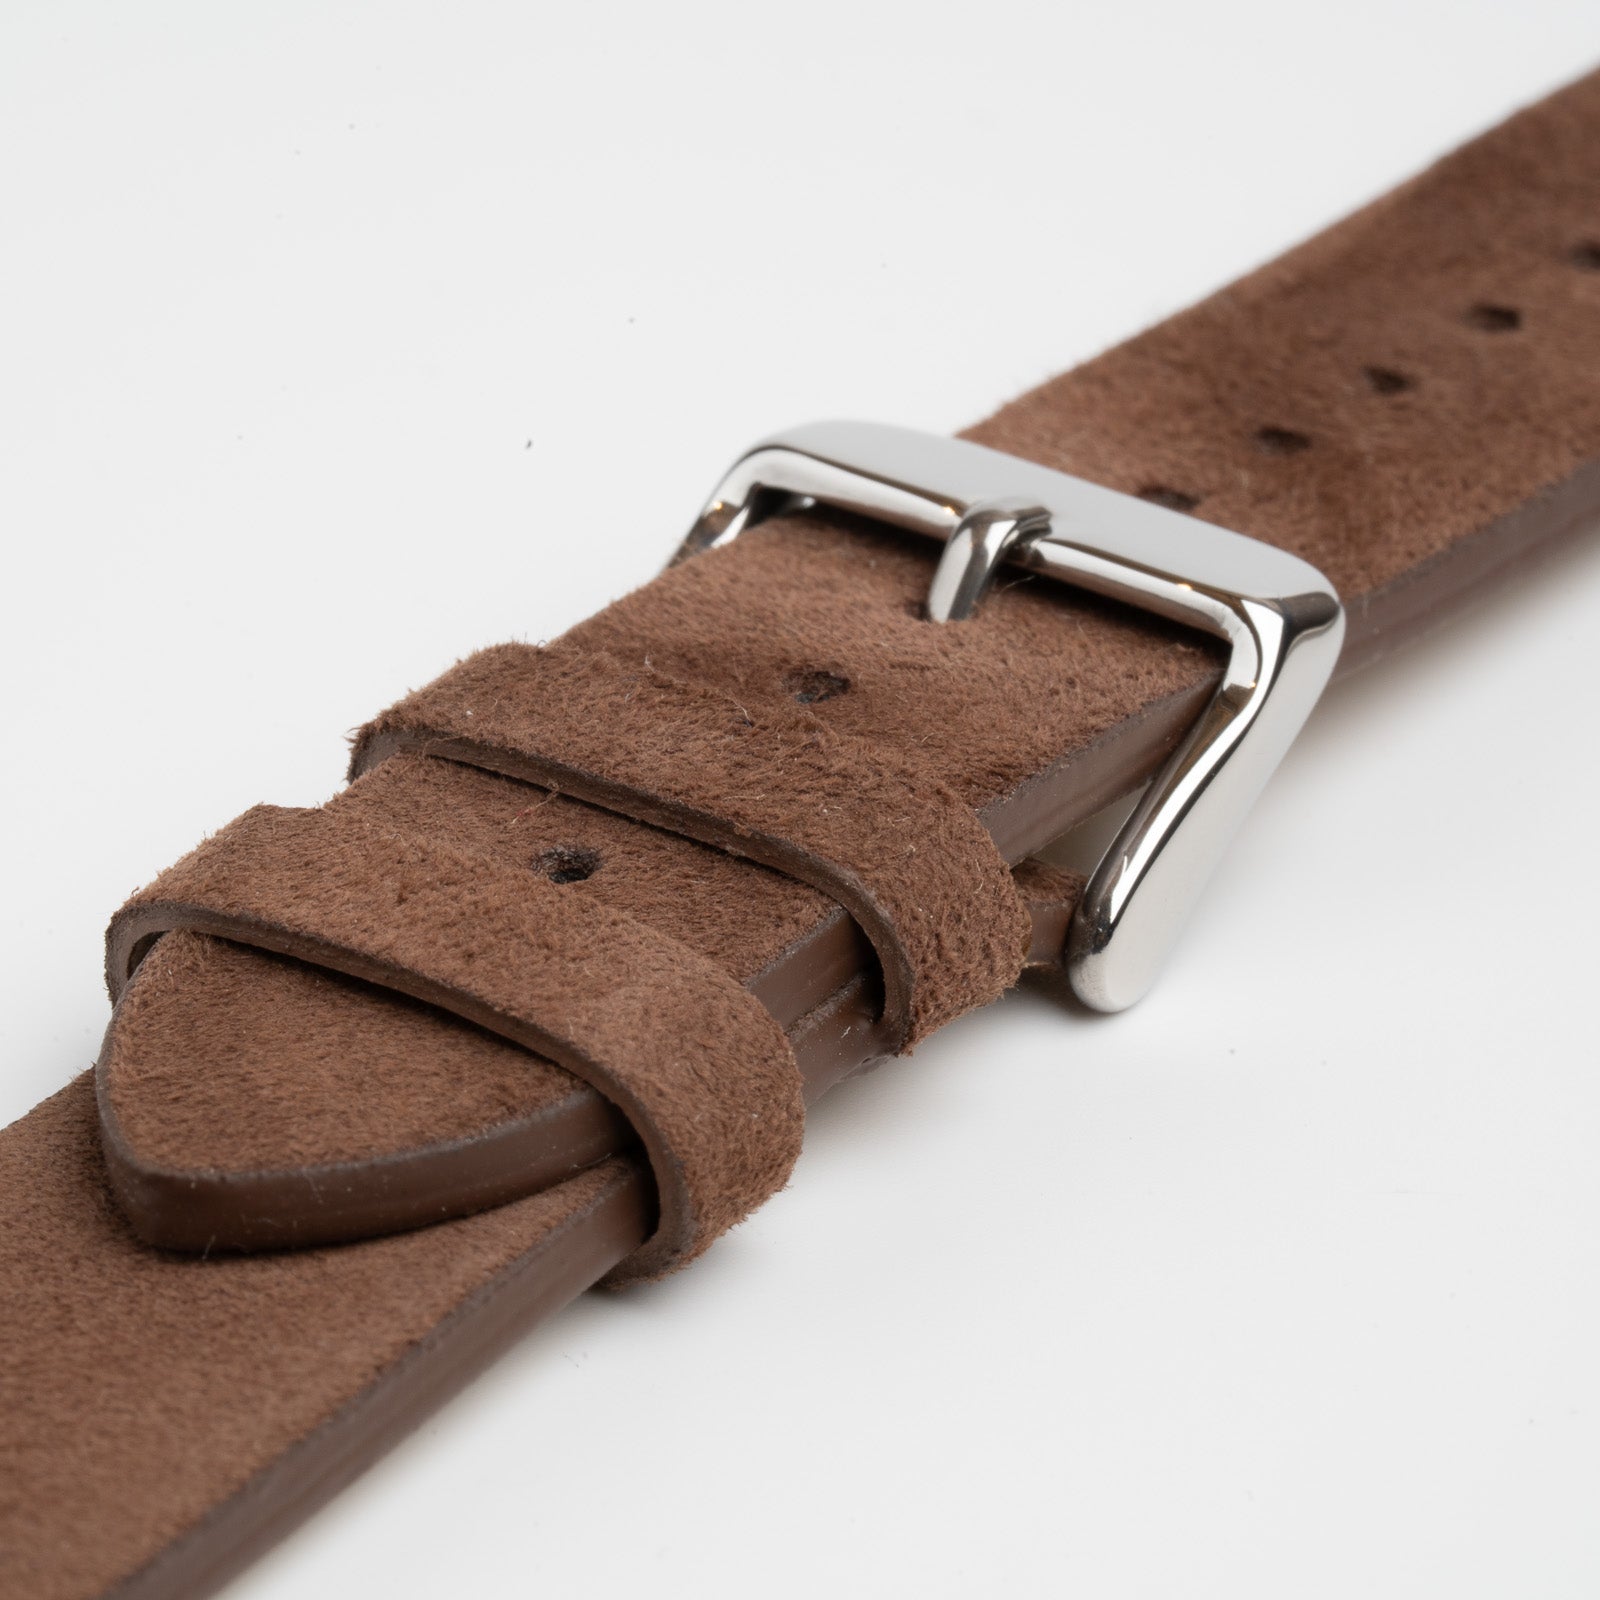 Kensington Napped Suede Brown Watch Strap